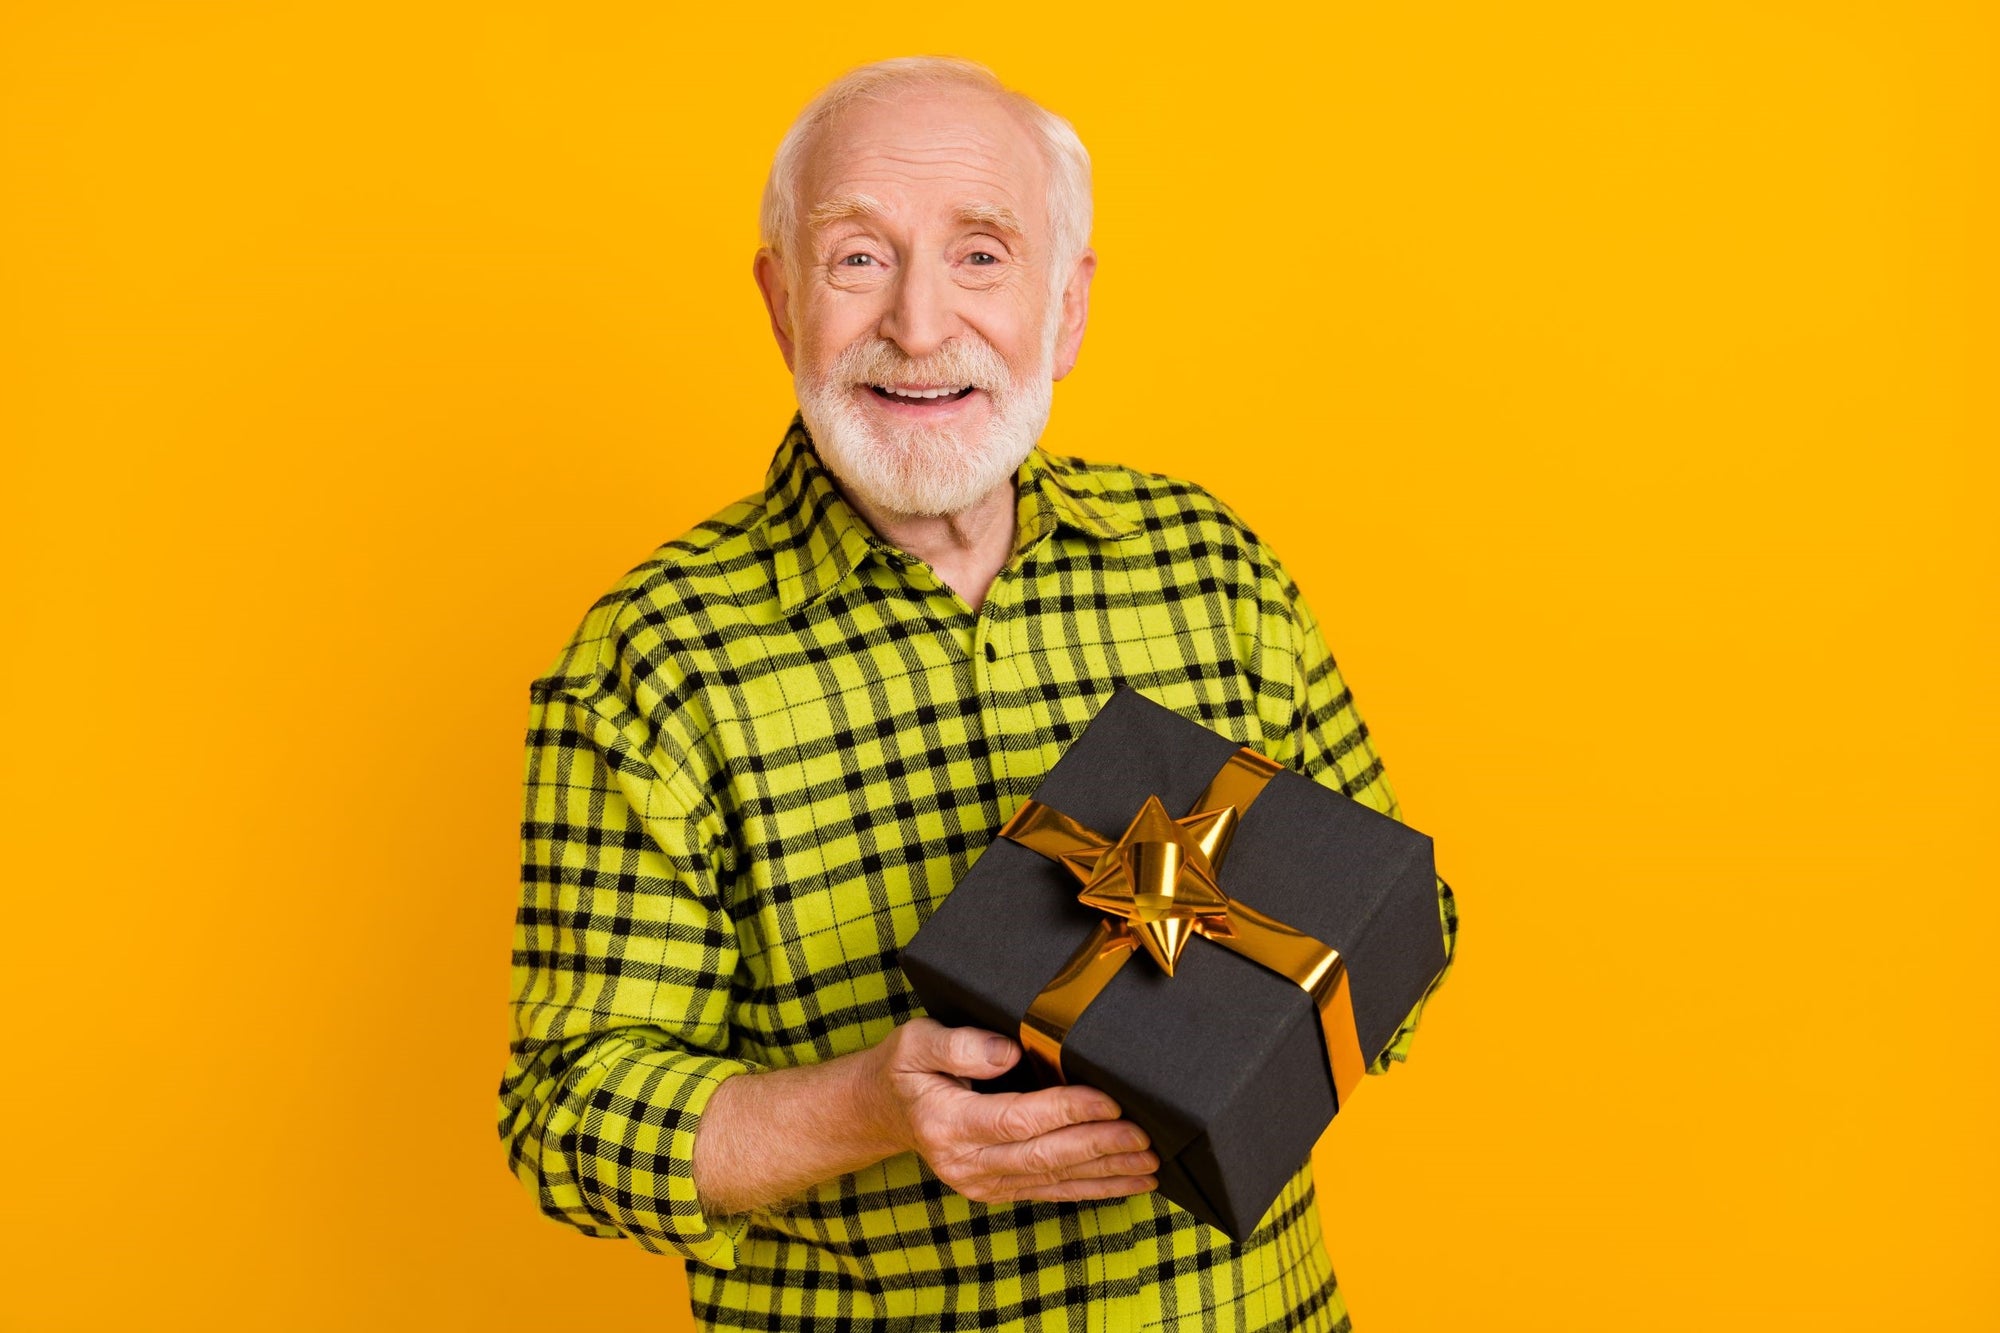 5 best Christian gifts for religious grandfather that he'll use all year long